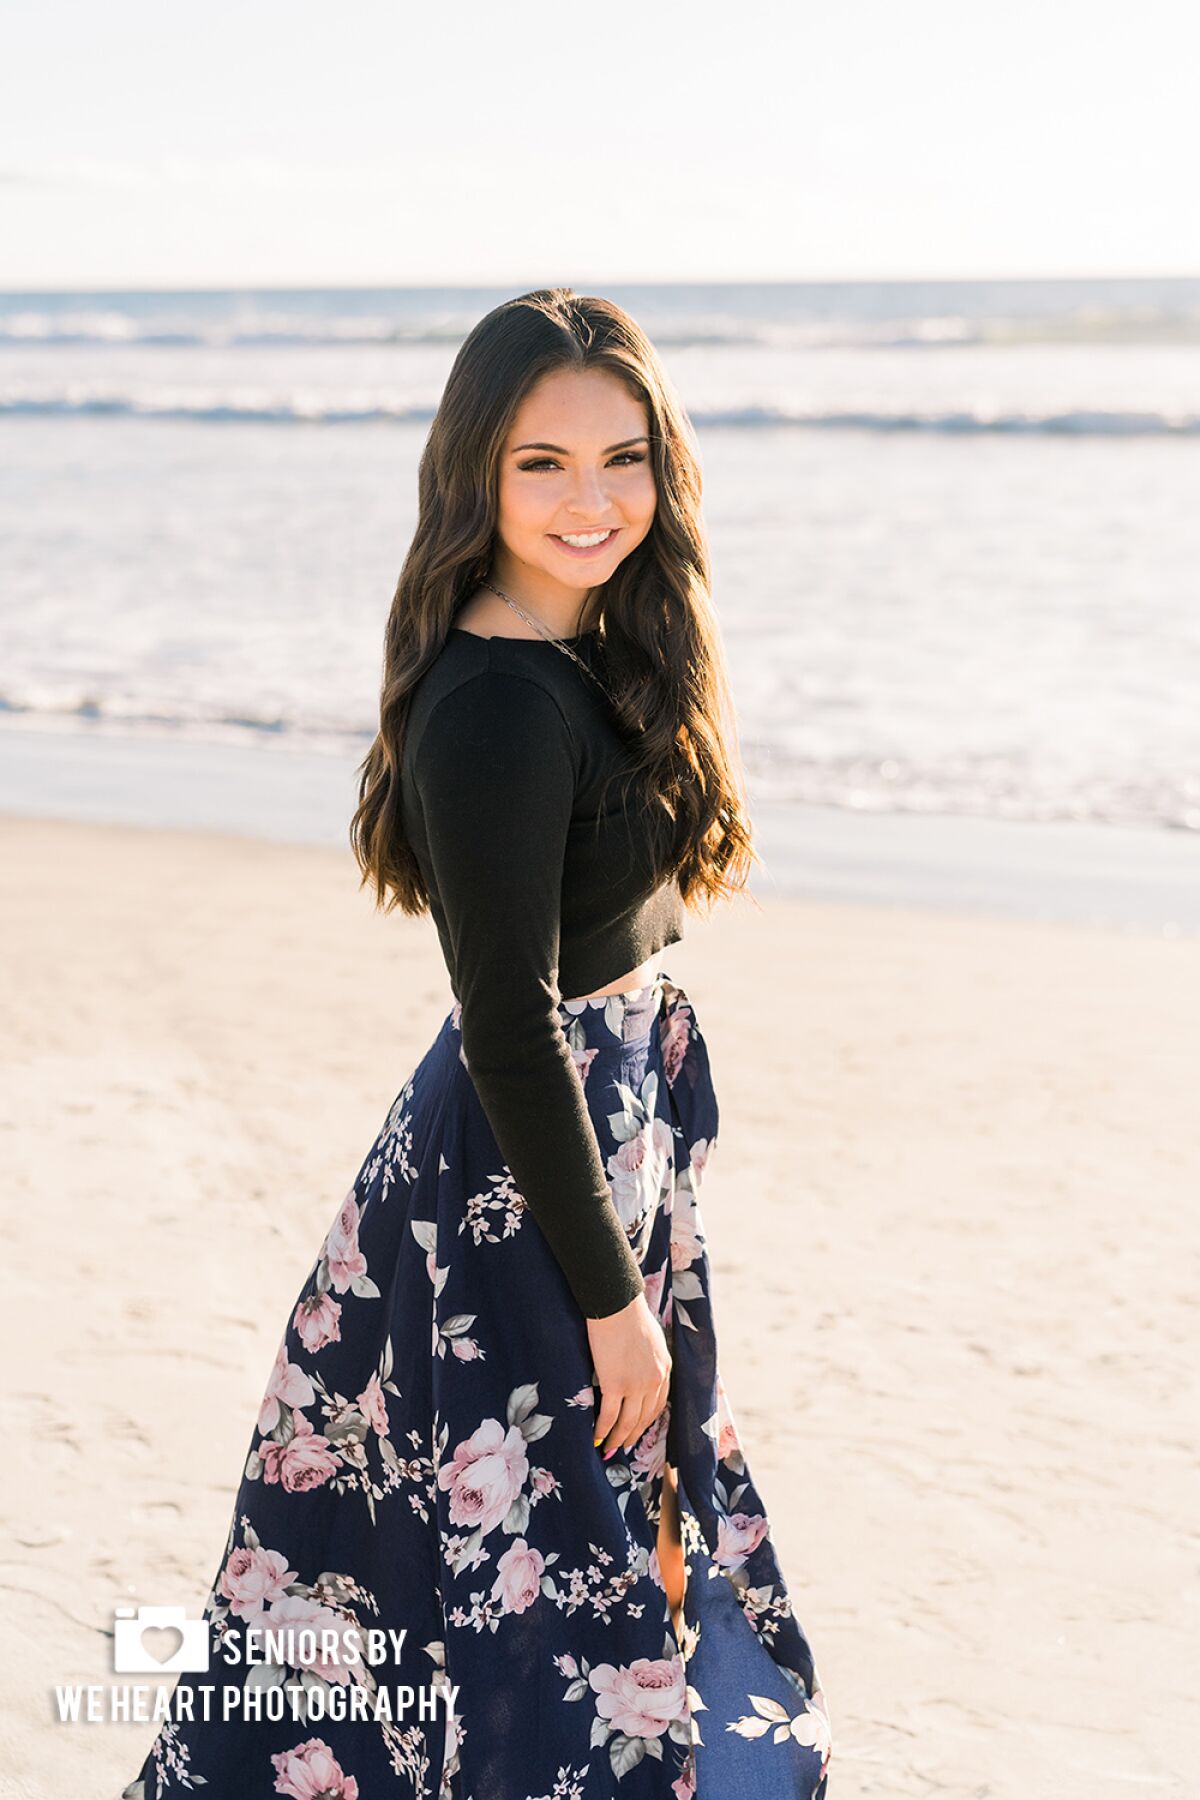 Jenna Rain Hernandez plans to use her Miss American Teen win to help empower young minority women.